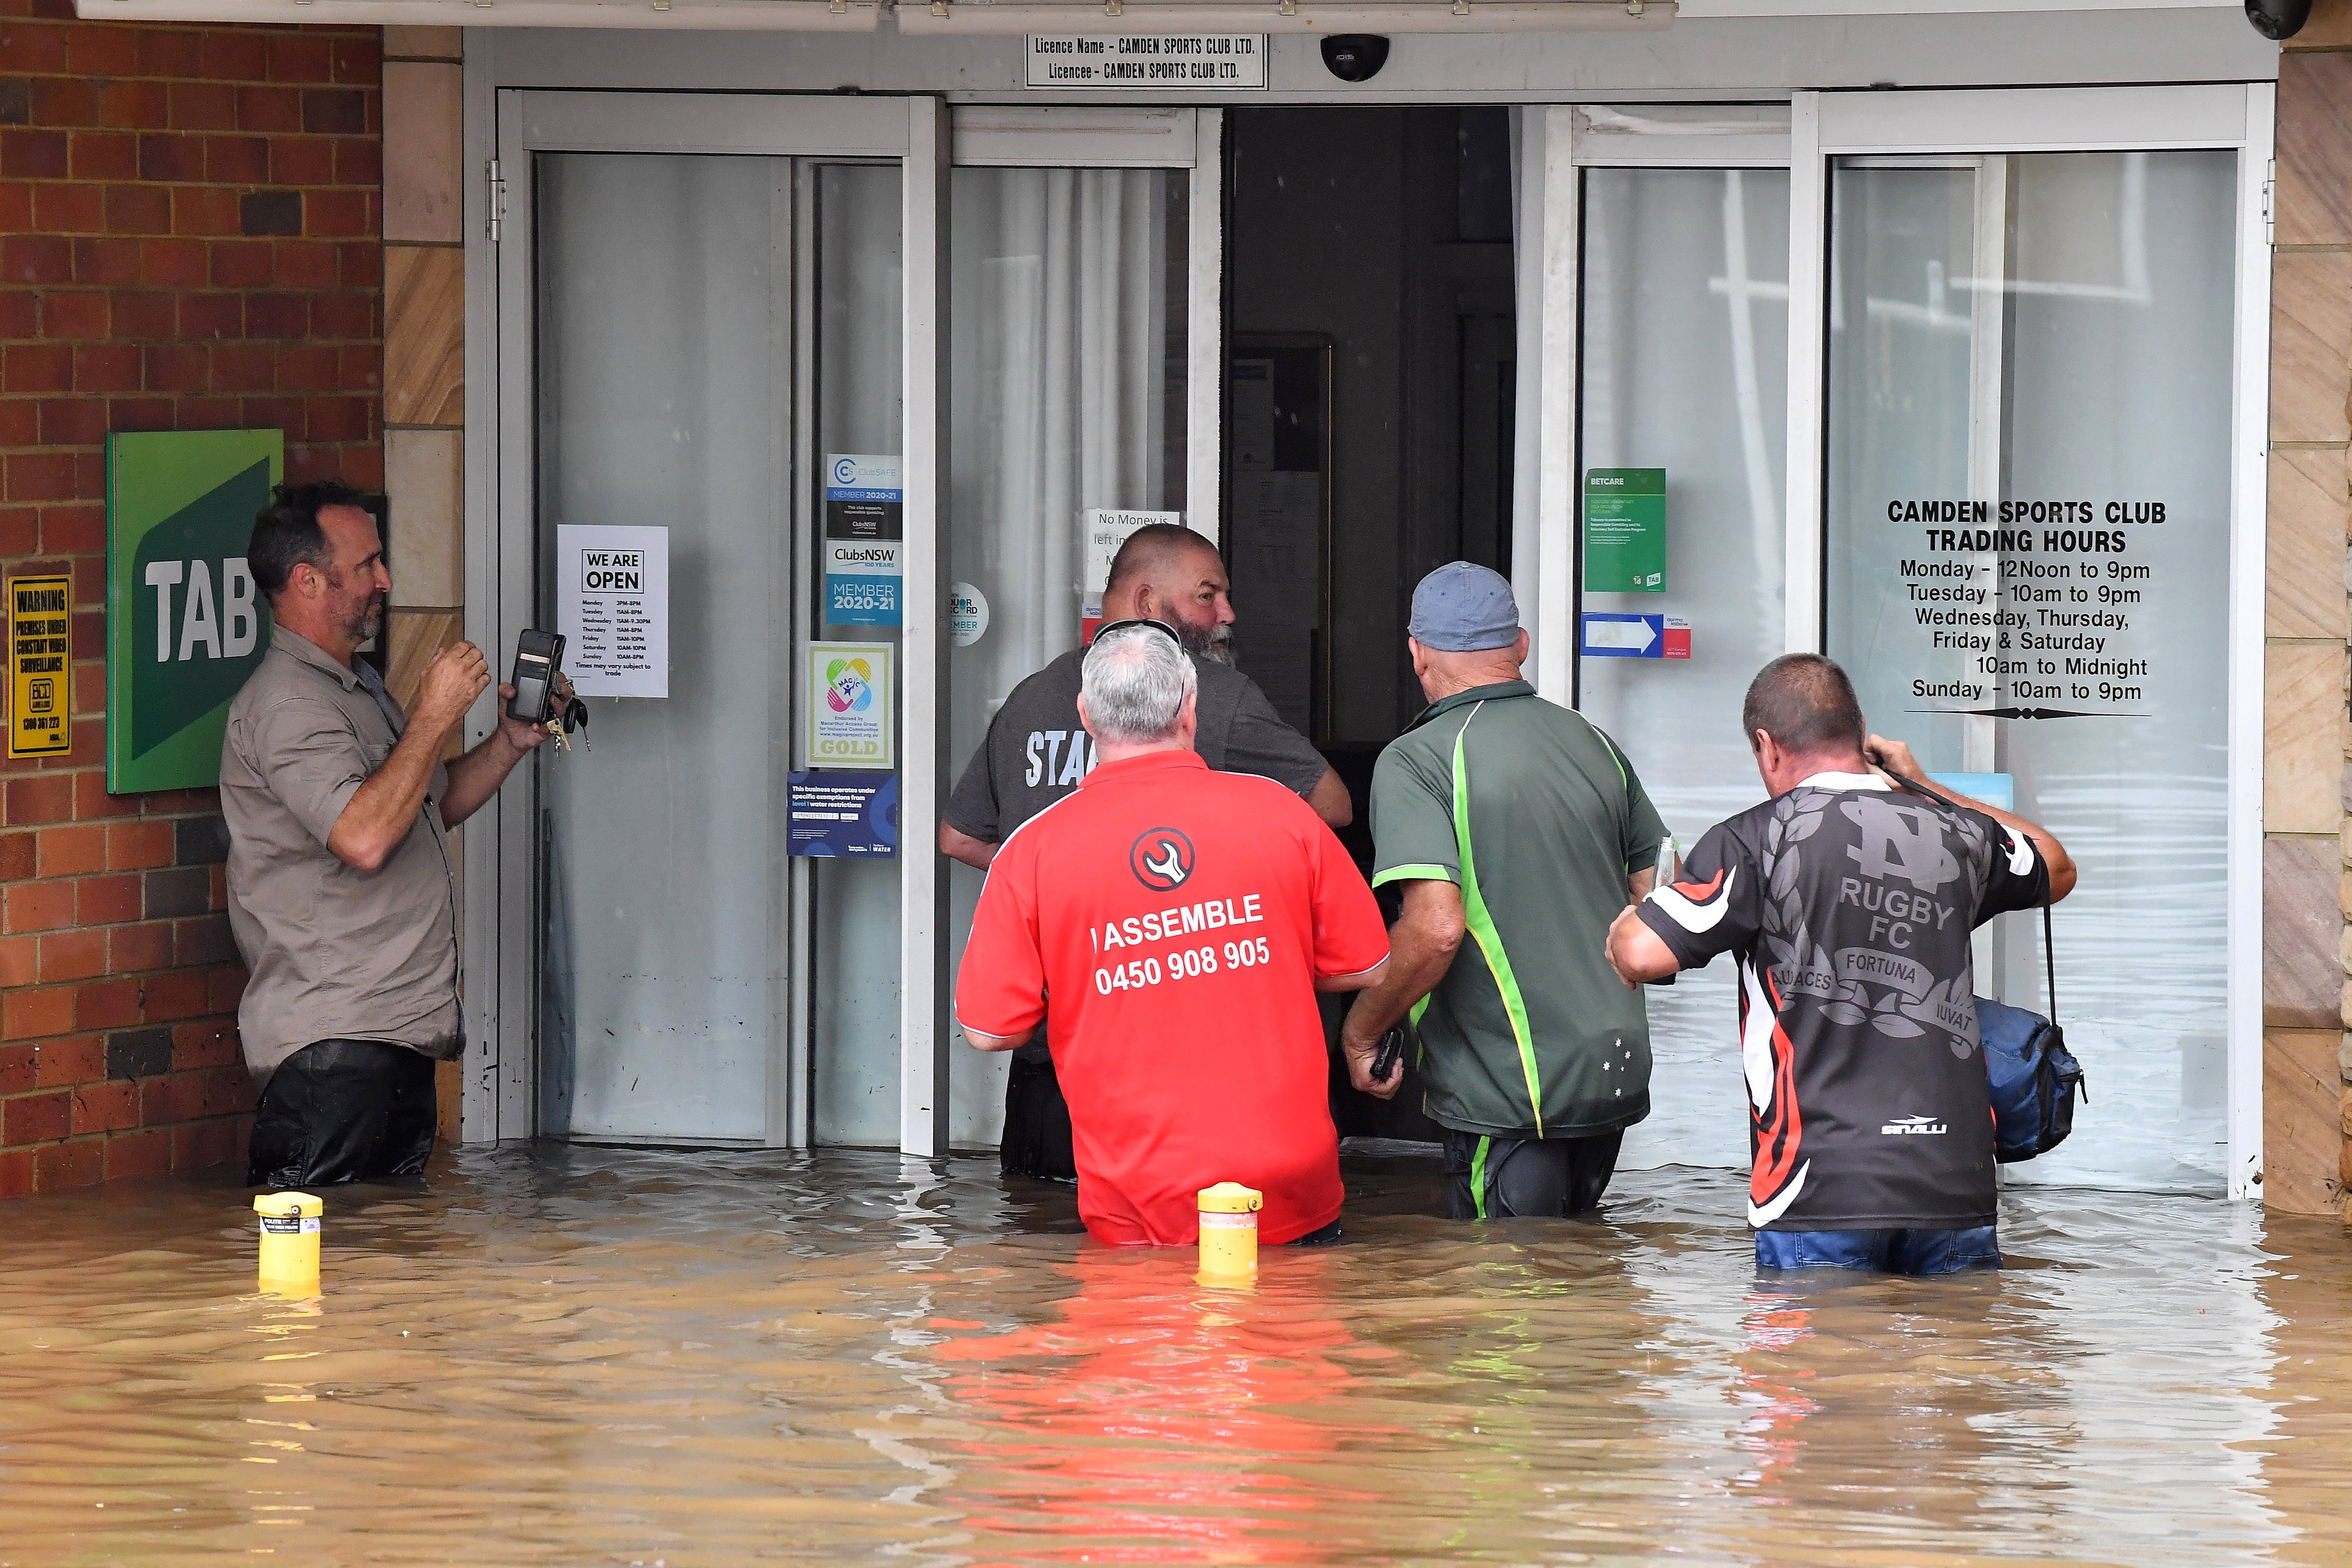 AUSTRALIA-WEATHER-FLOOD Staff of the Camden Sports Club wade through the floodwaters to enter into the building in southwestern Camden suburb of Sydney on March 8